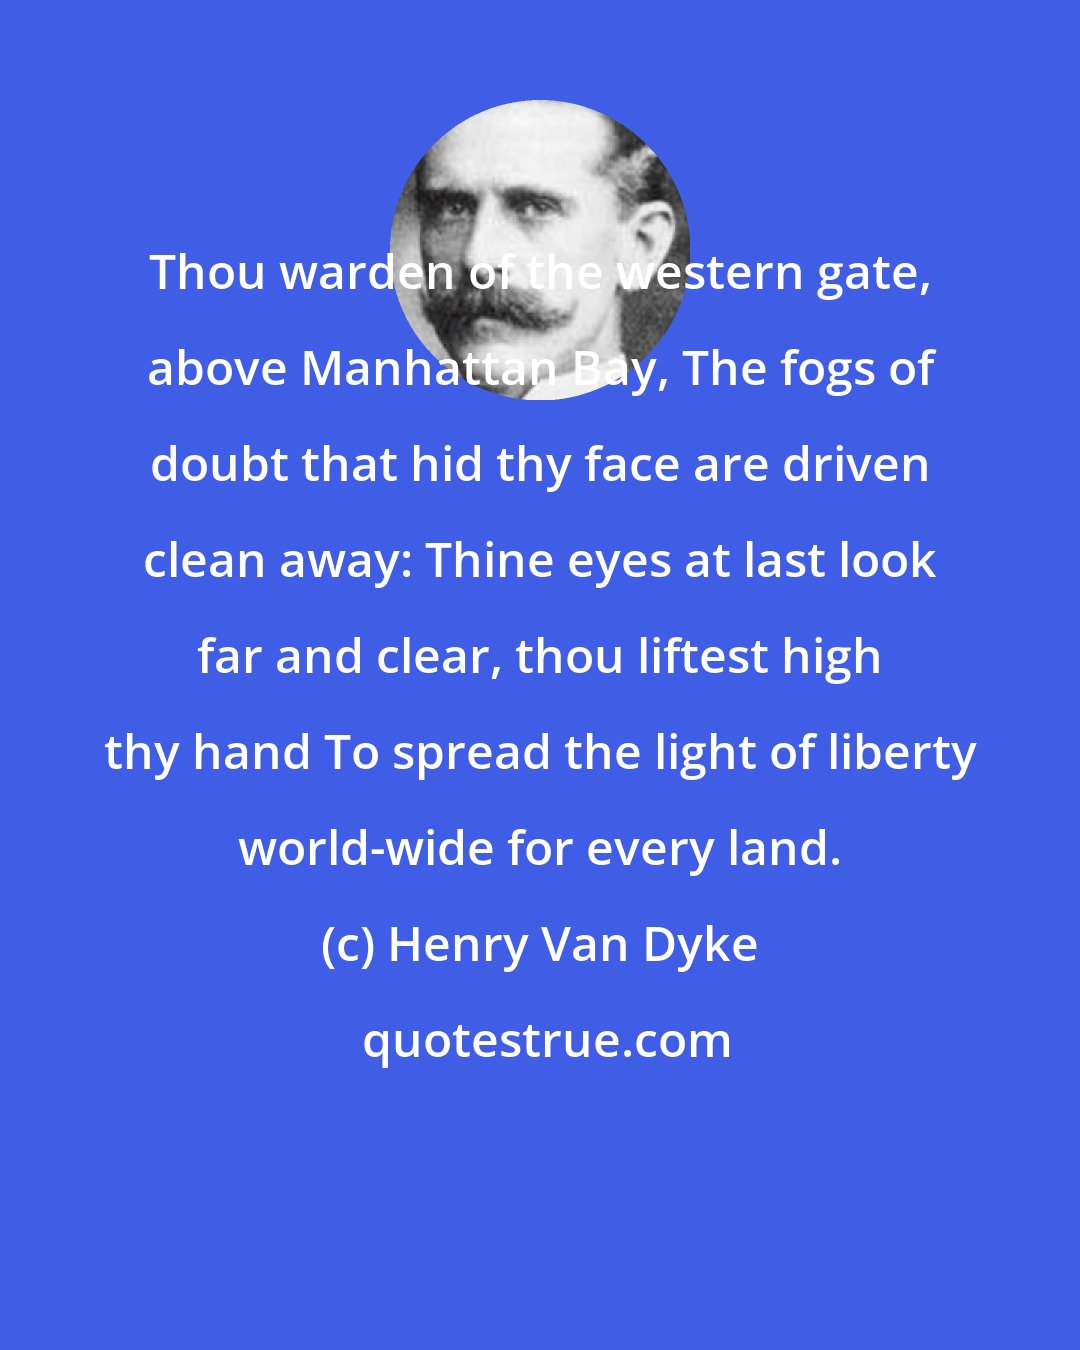 Henry Van Dyke: Thou warden of the western gate, above Manhattan Bay, The fogs of doubt that hid thy face are driven clean away: Thine eyes at last look far and clear, thou liftest high thy hand To spread the light of liberty world-wide for every land.